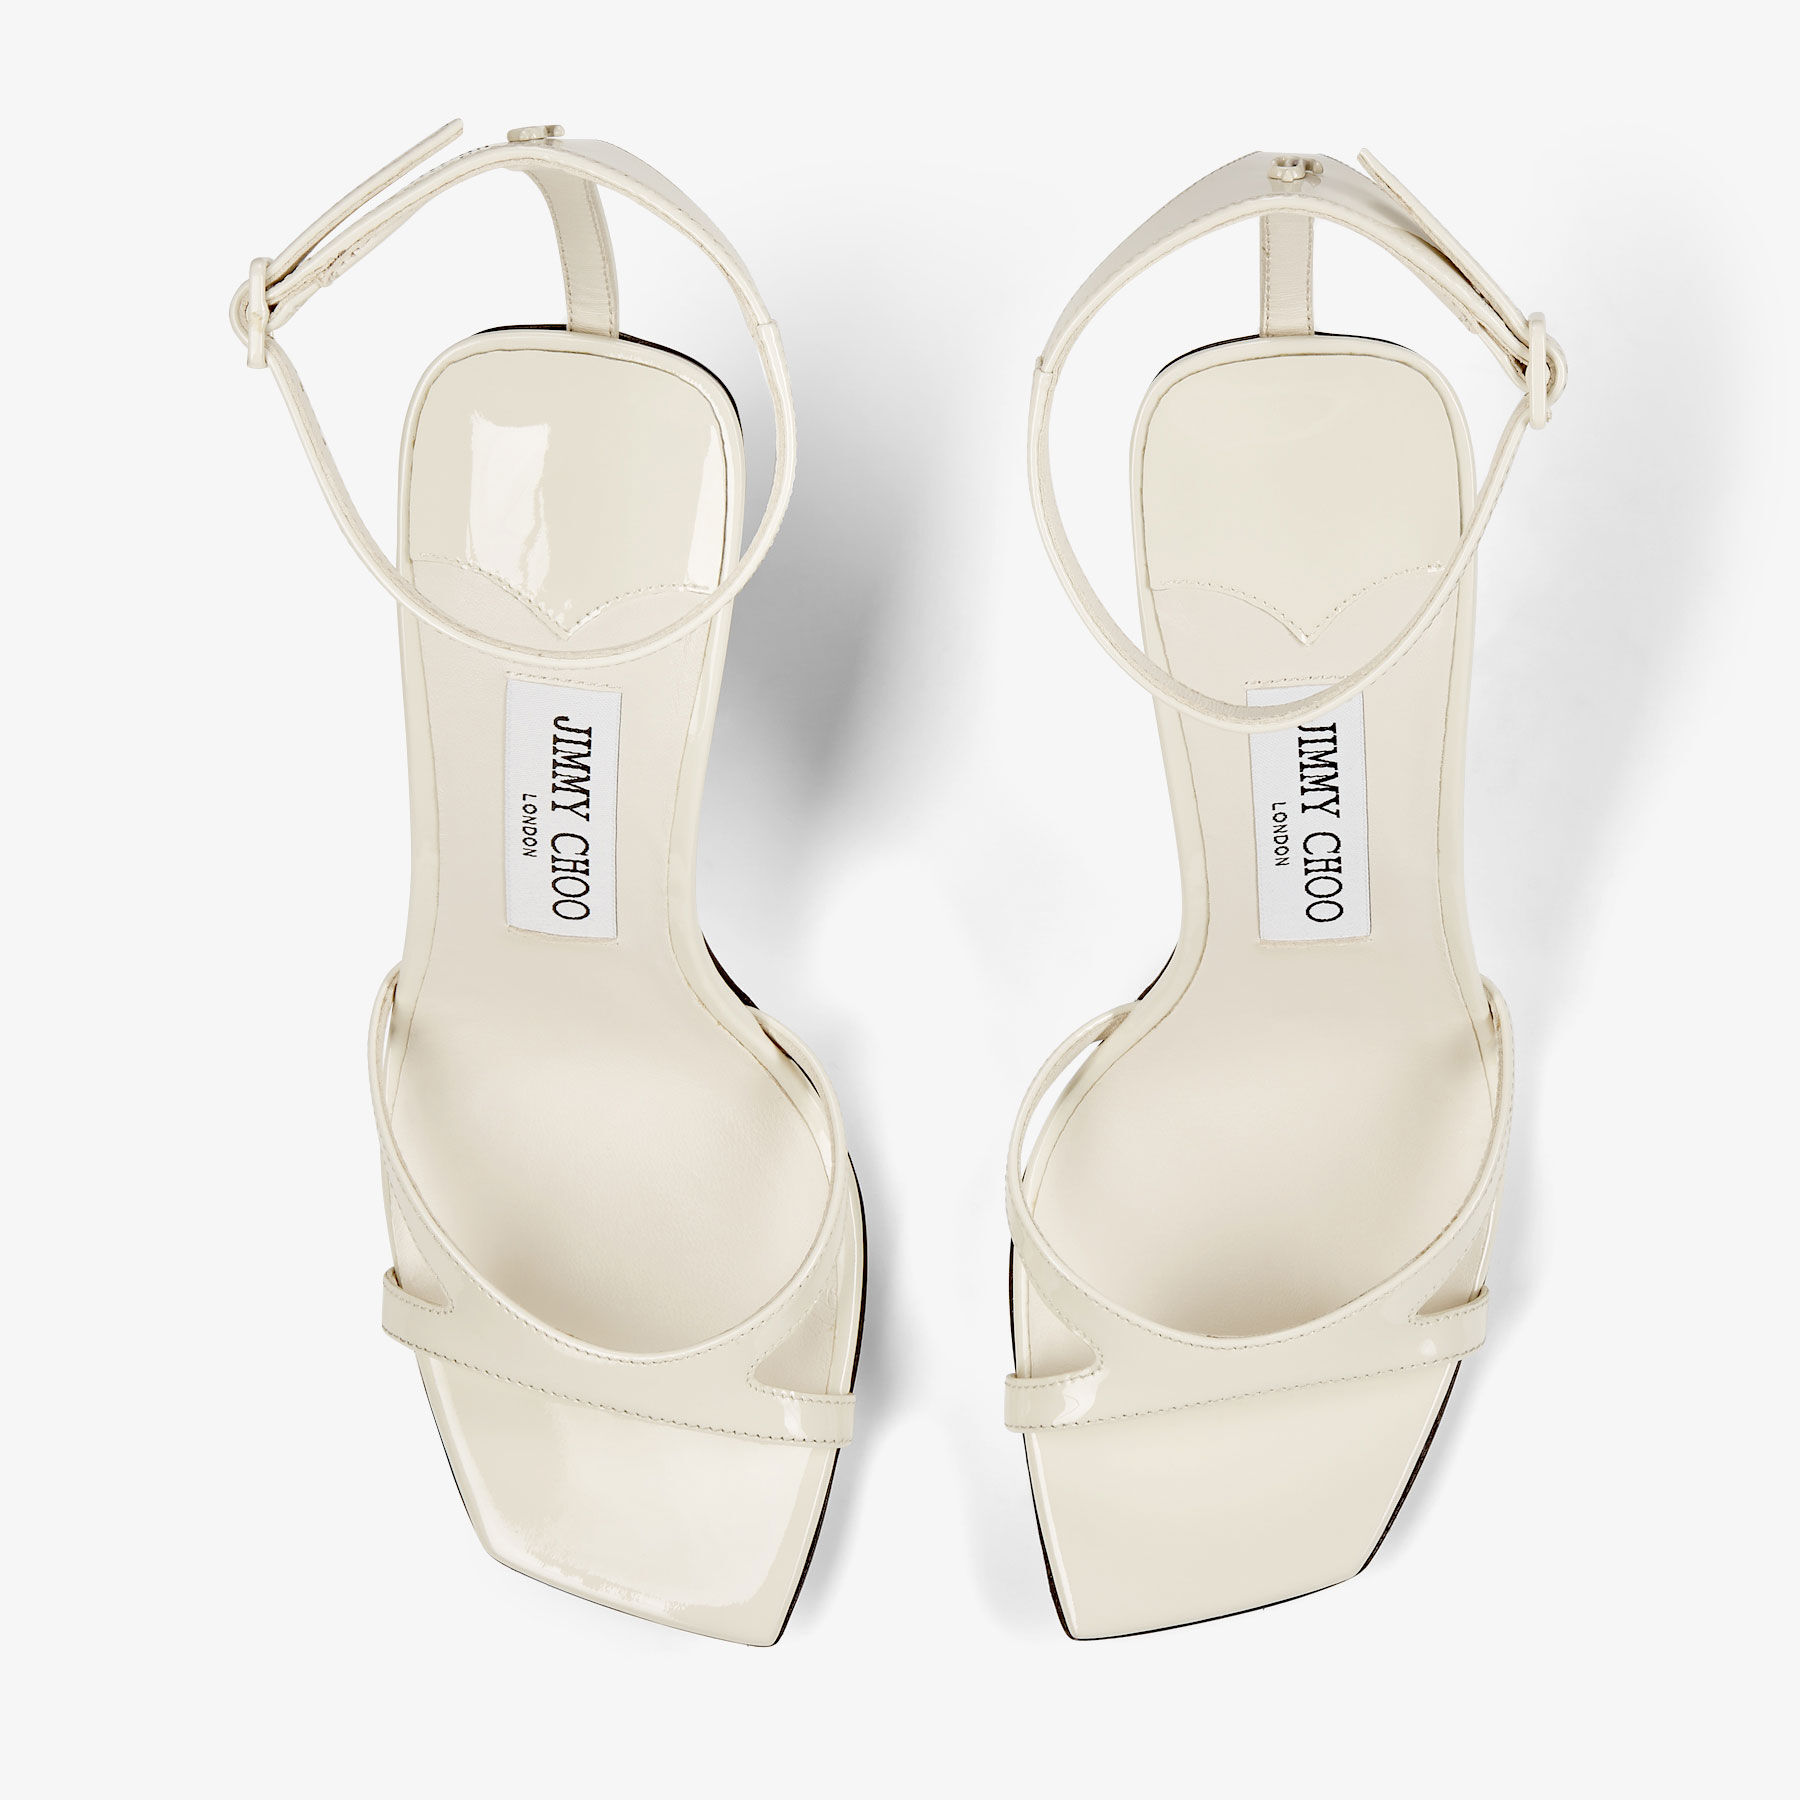 Ixia Sandal 95 | Latte Patent Leather Sandals | New Collection 